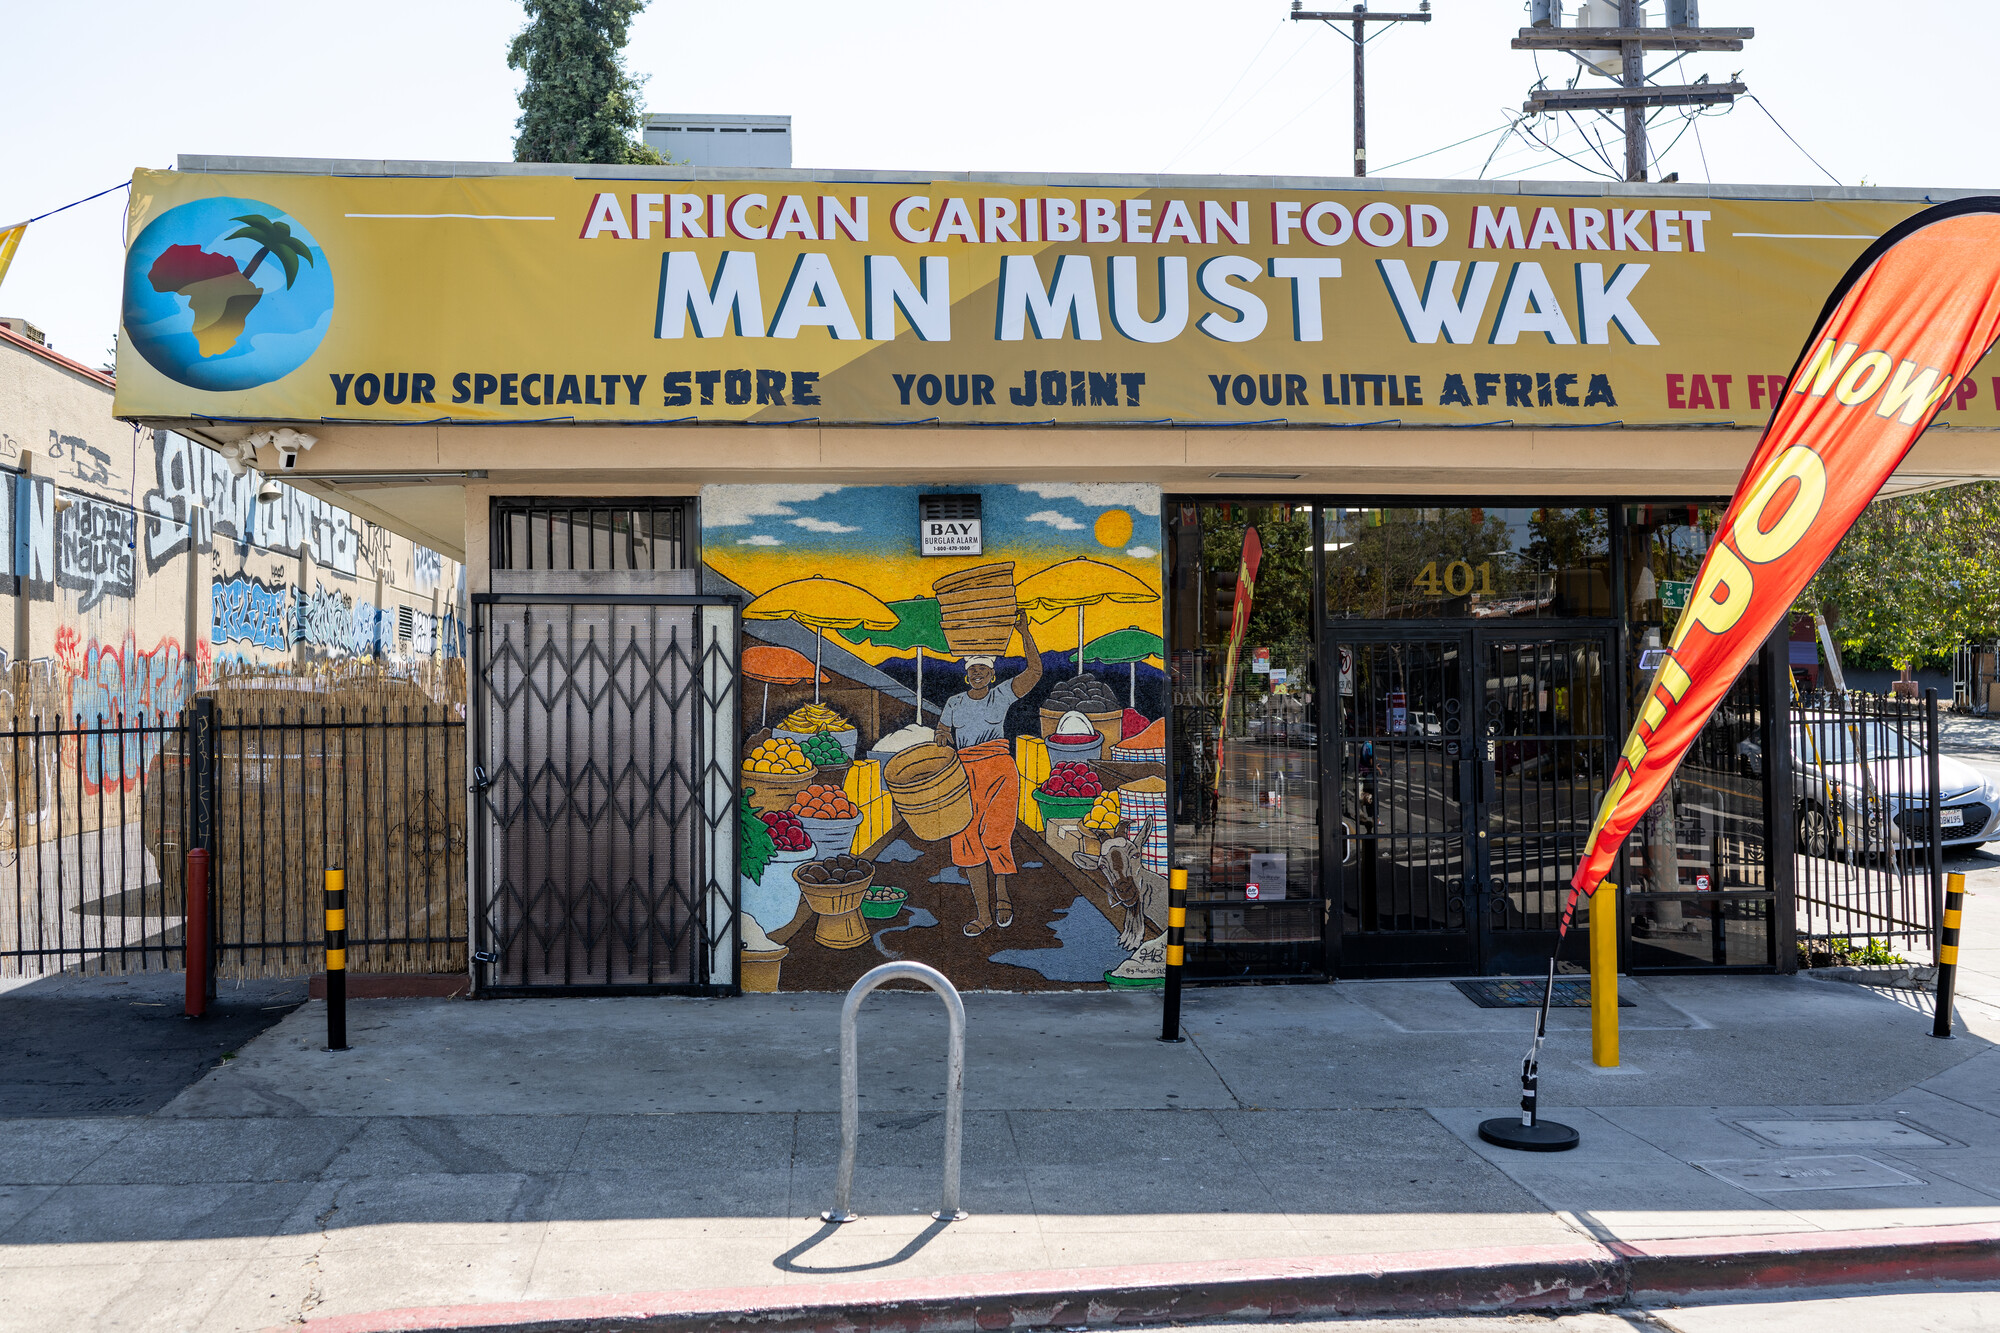 Afro-Caribbean market Man Must Wak's bright yellow storefront with a mural depicting a woman strolling through a bustling African outdoor market.